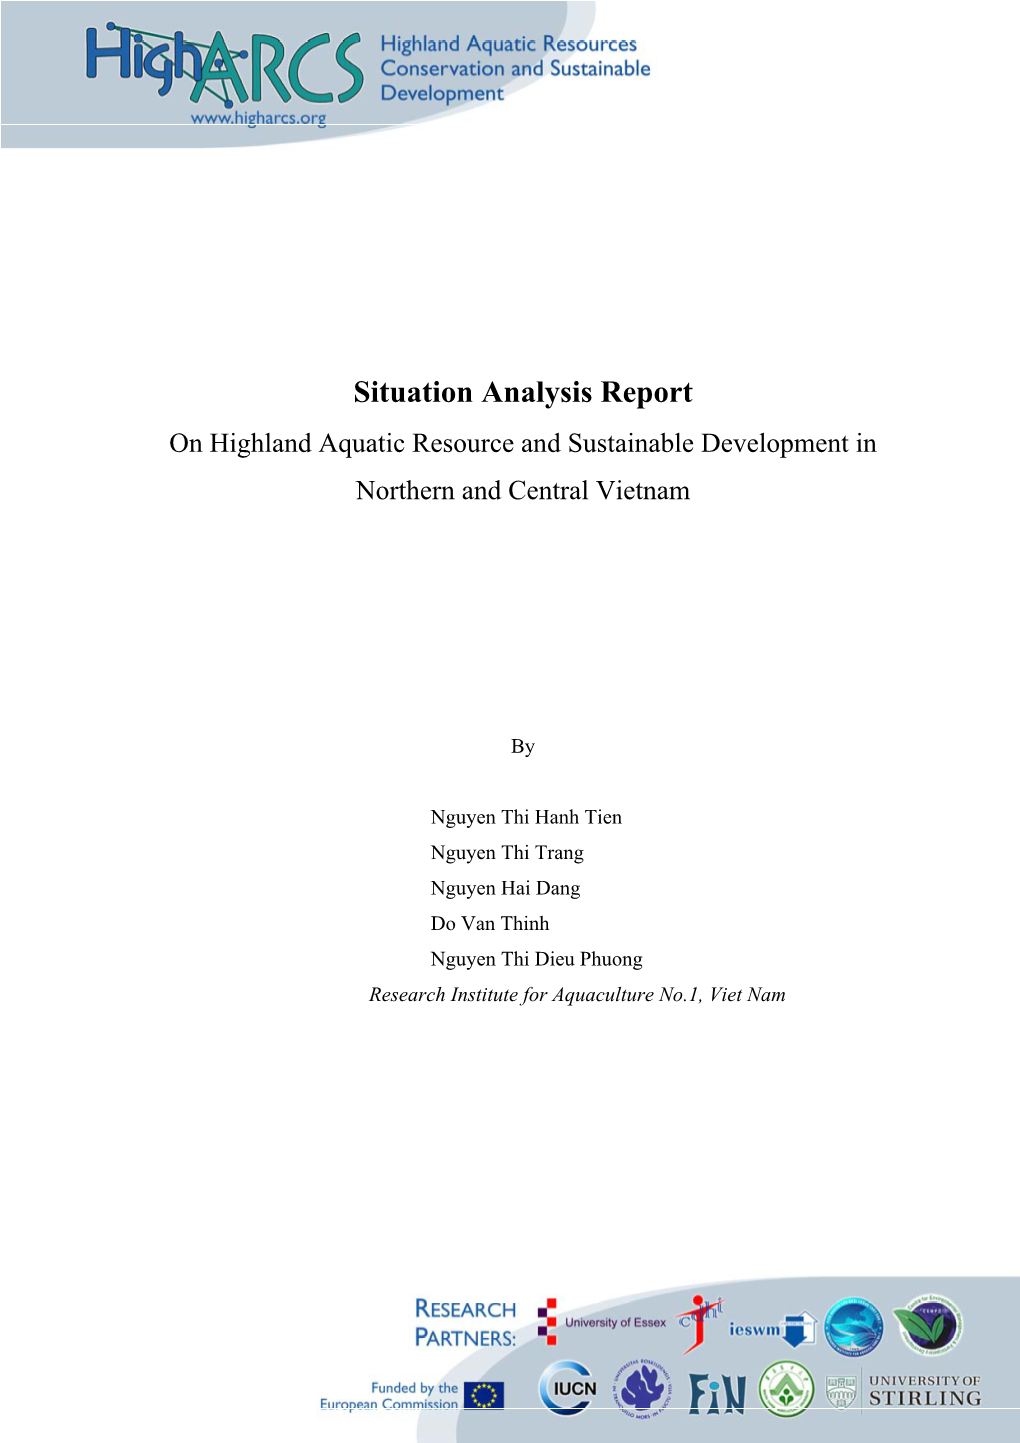 Situation Analysis Report on Highland Aquatic Resource and Sustainable Development in Northern and Central Vietnam